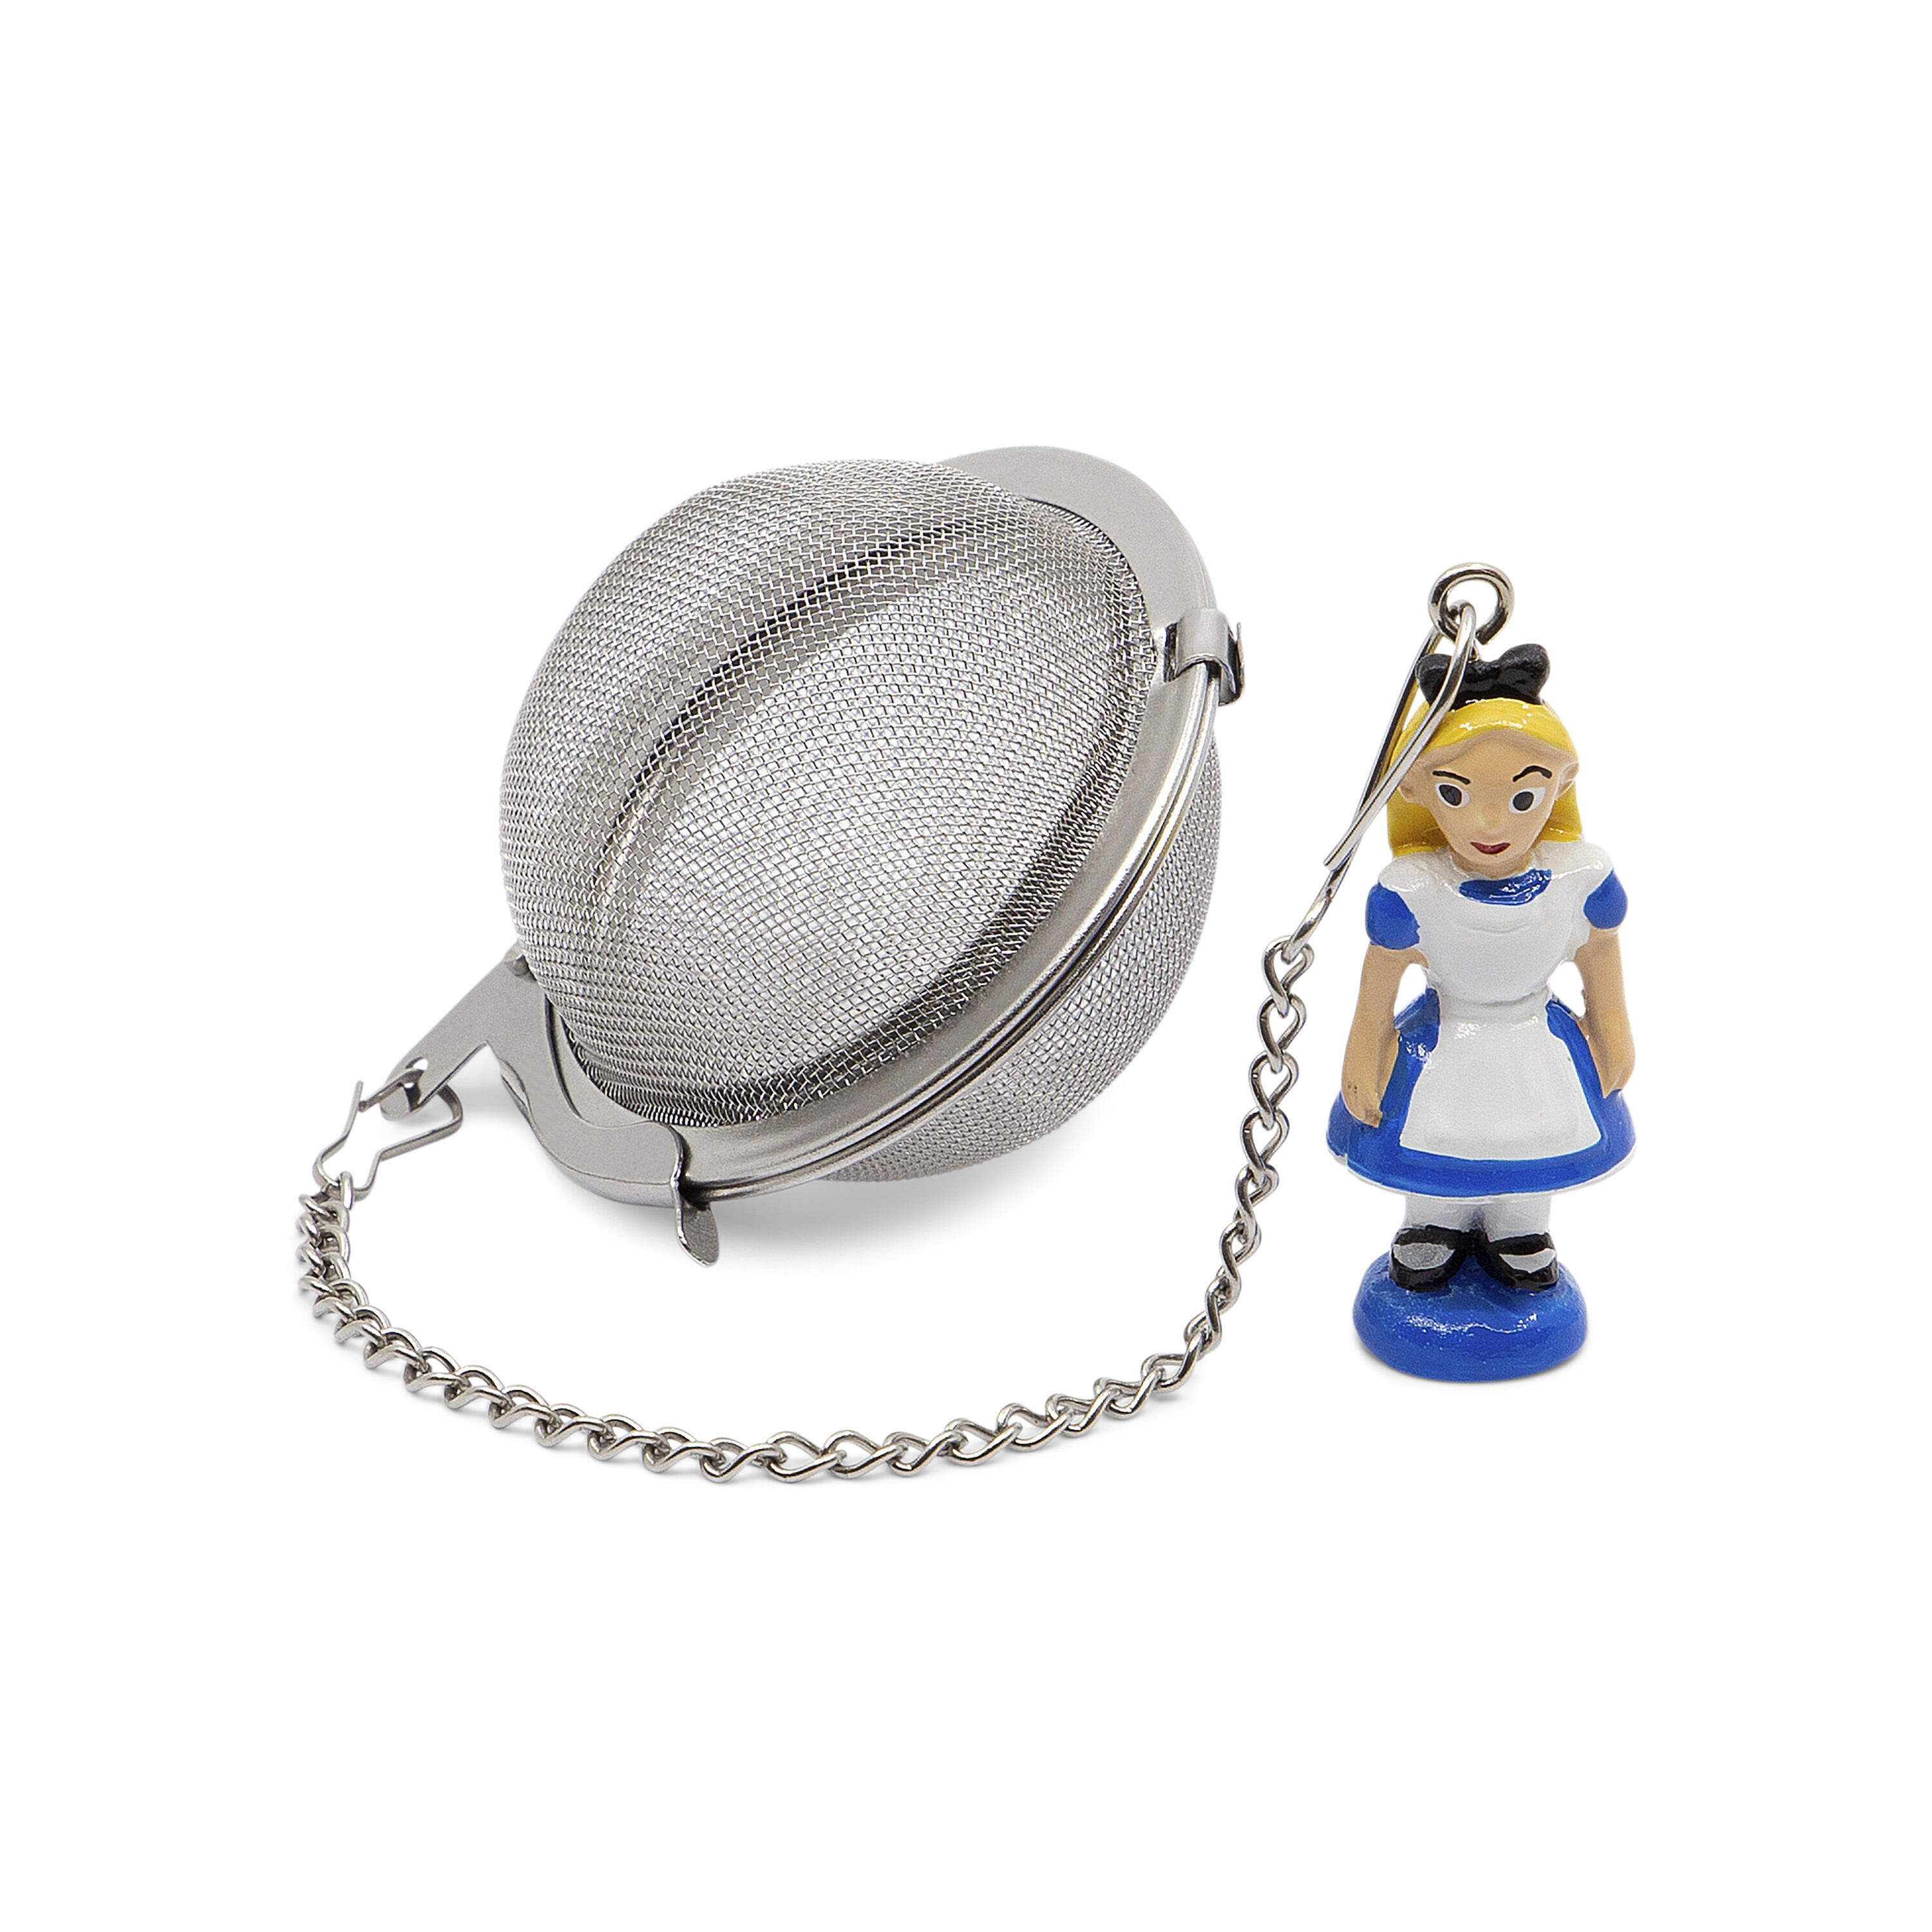 Tea Ball Alice In Wonderland Inspired Tea Infuser With Removable Charm Literature Tea Infuser  - Fantasy Magic